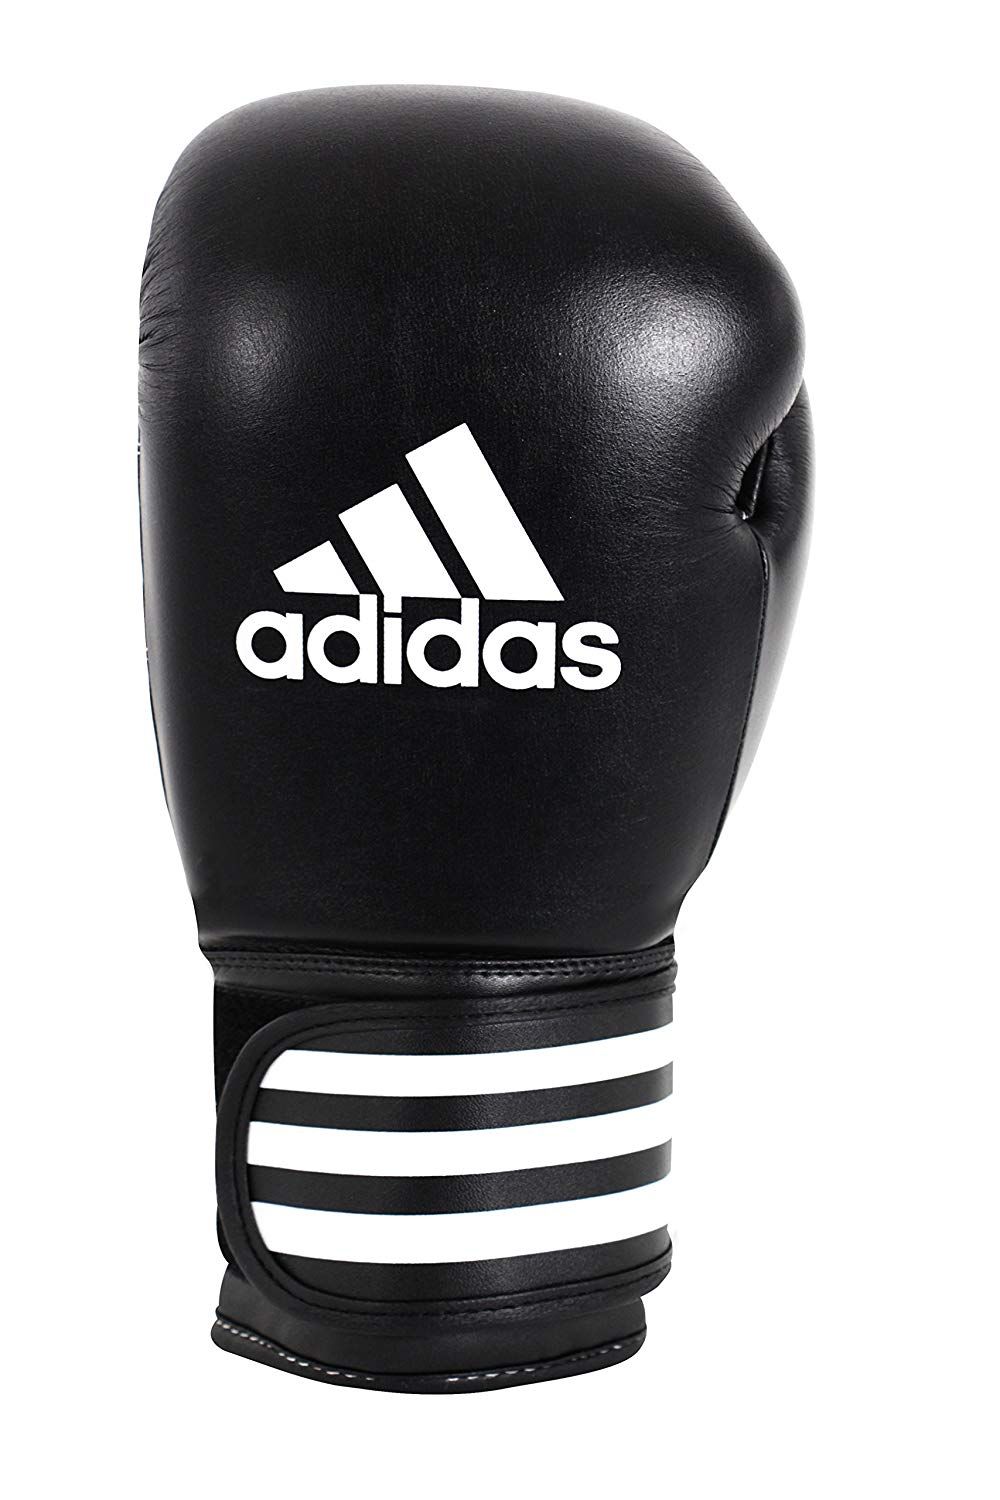 Boxing Adidas Boxing Gloves Alley Performer -